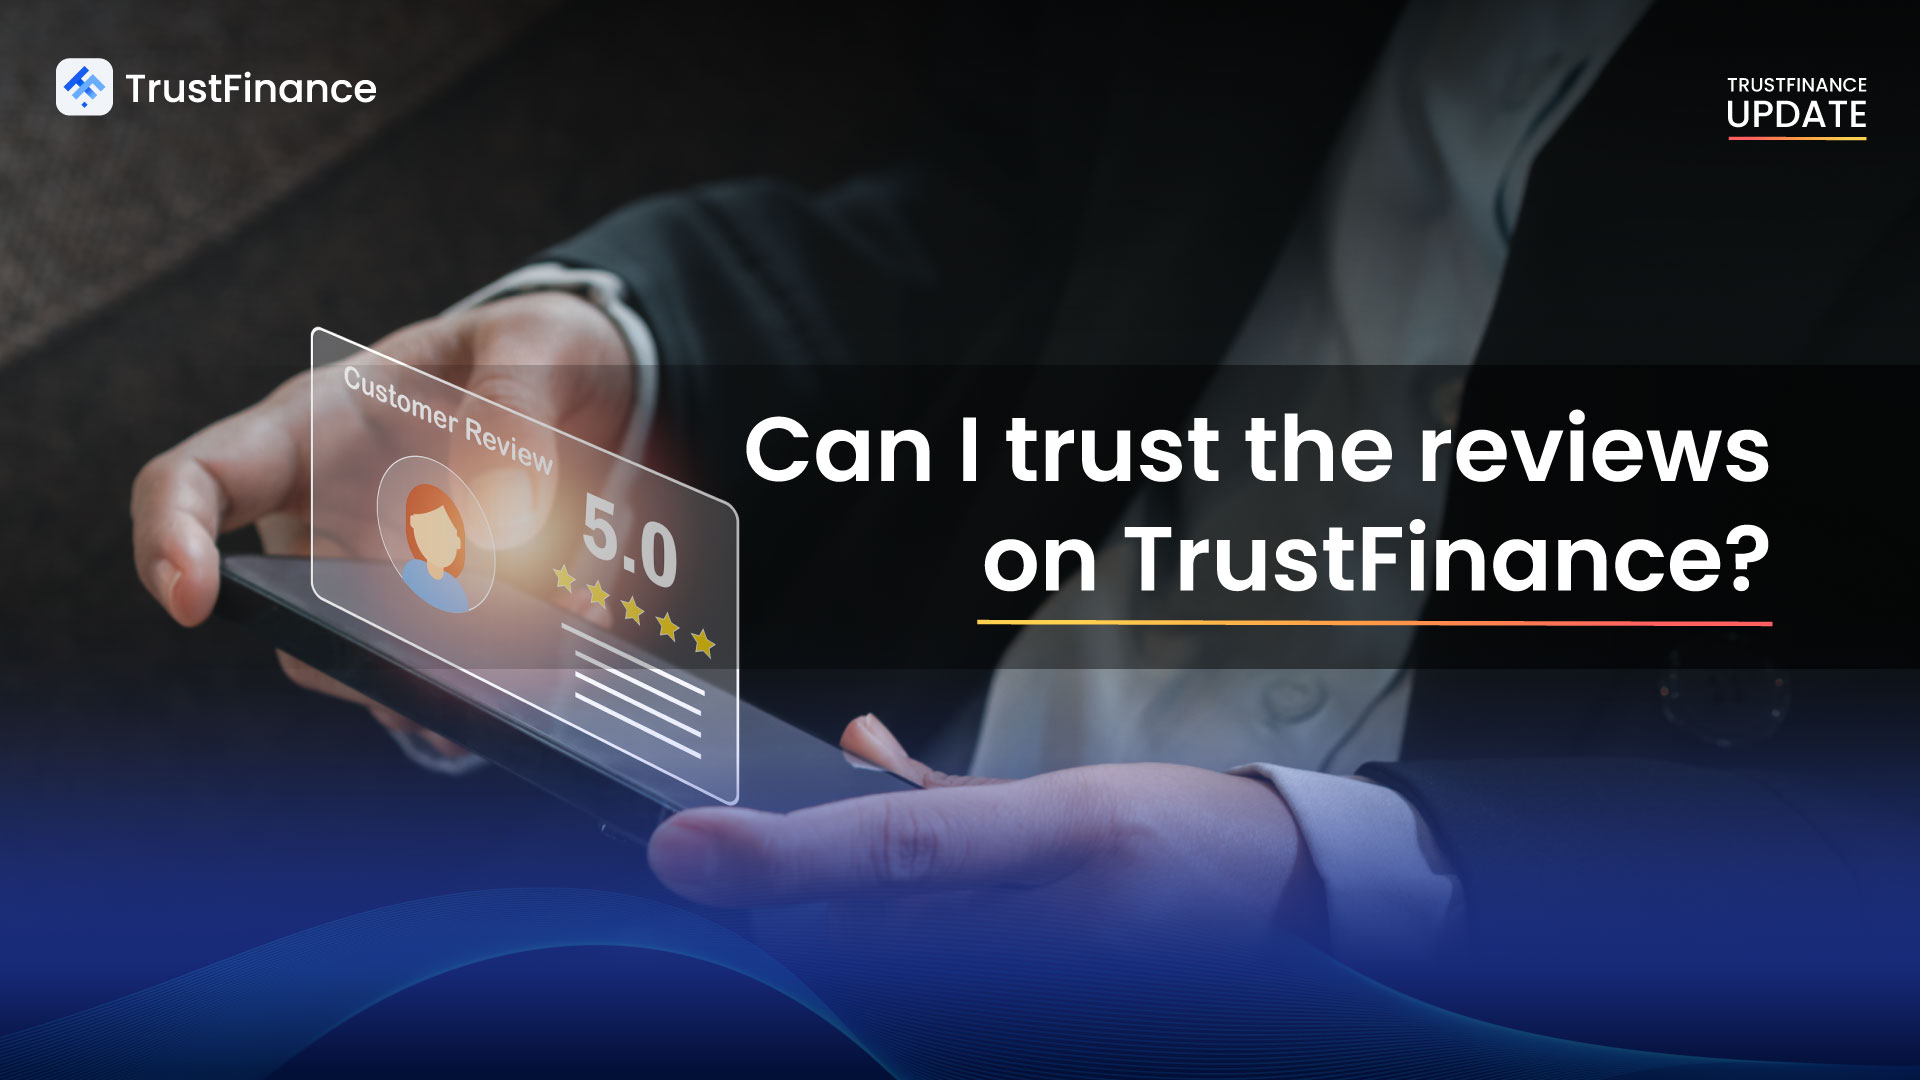 Can I trust the reviews on TrustFinance?